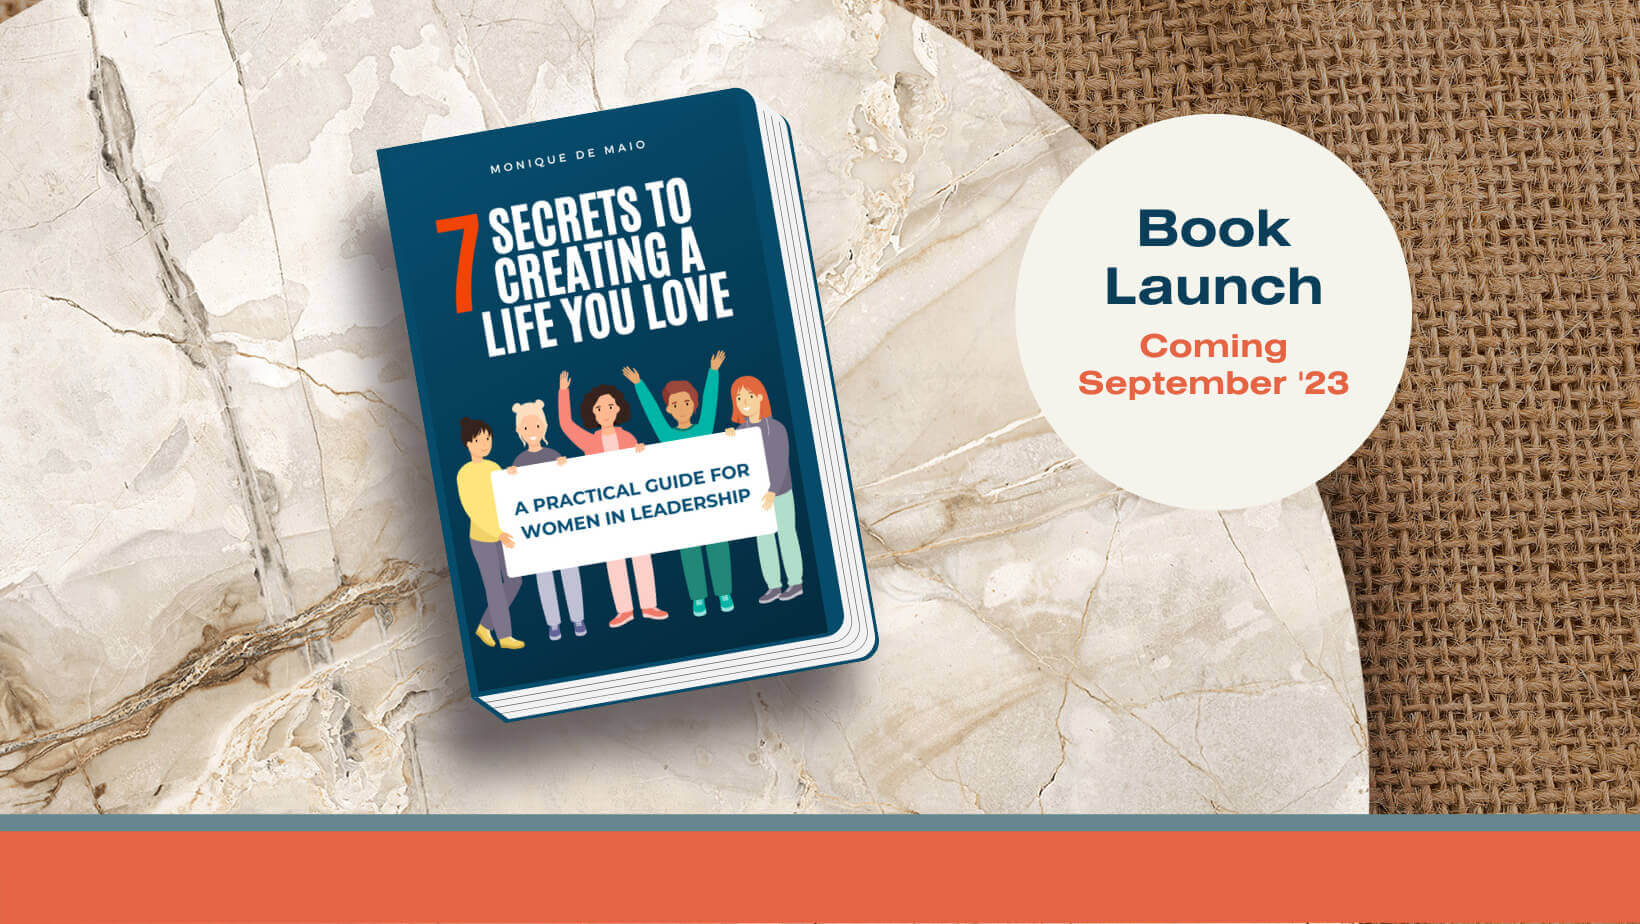 7 Secrets to Creating a Life You Love: A Practical Guide for Women in Leadership